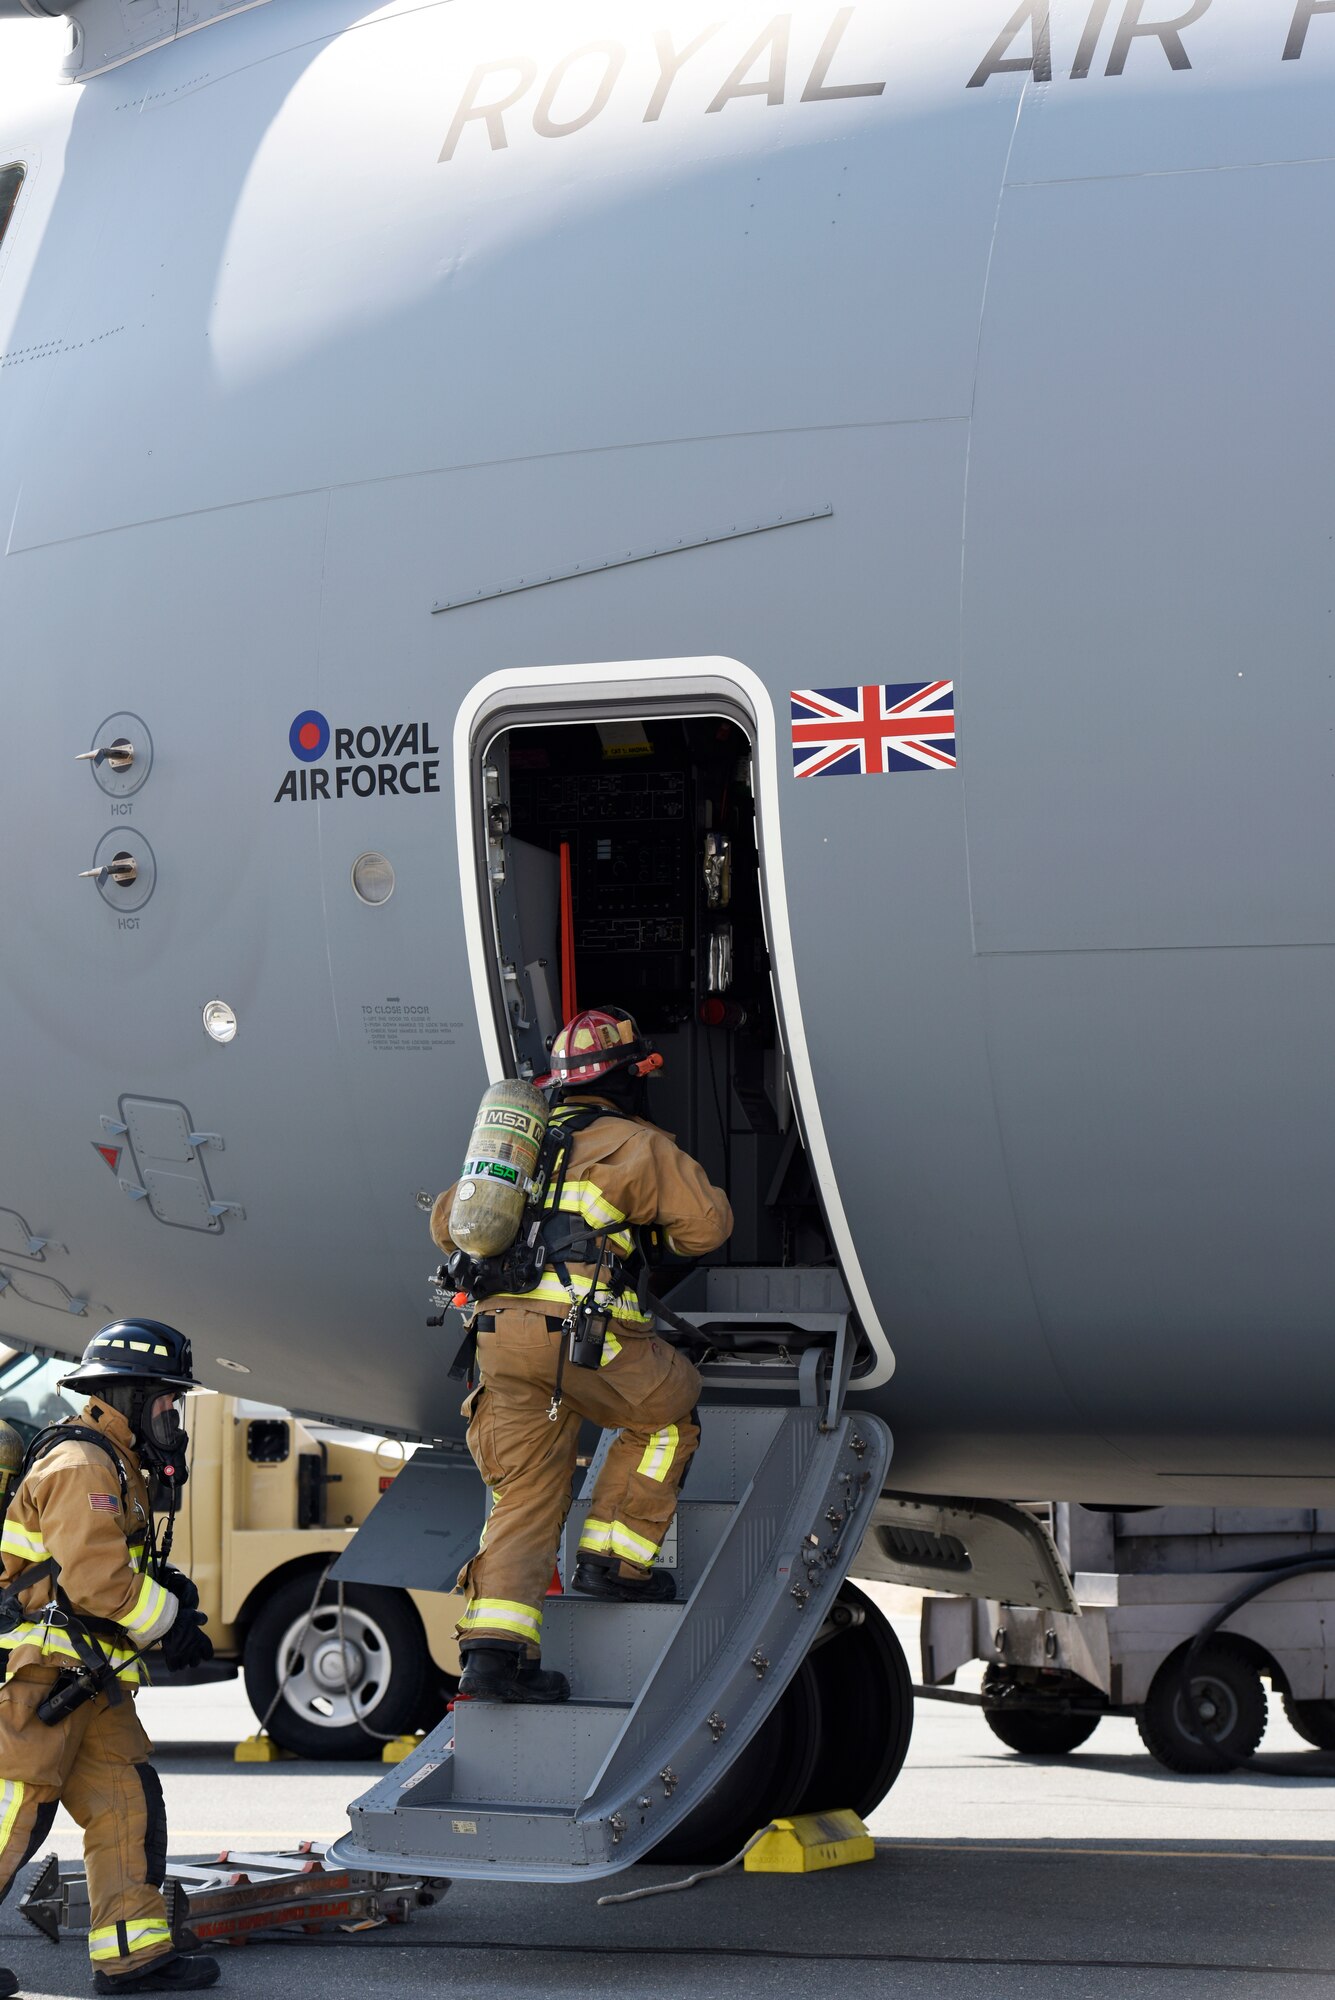 Firefighters from the 379th Expeditionary Civil Engineer Squadron enter a Royal Air Force A400M Atlas aircraft during a major accident response exercise at Al Udeid Air Base, Qatar on Nov. 12, 2019. The MARE was developed by U.S. Air Force and RAF planners in order to increase coalition partner interoperability during an emergency situation.(U.S. Air Force photo by Tech. Sgt. Ian Dean)